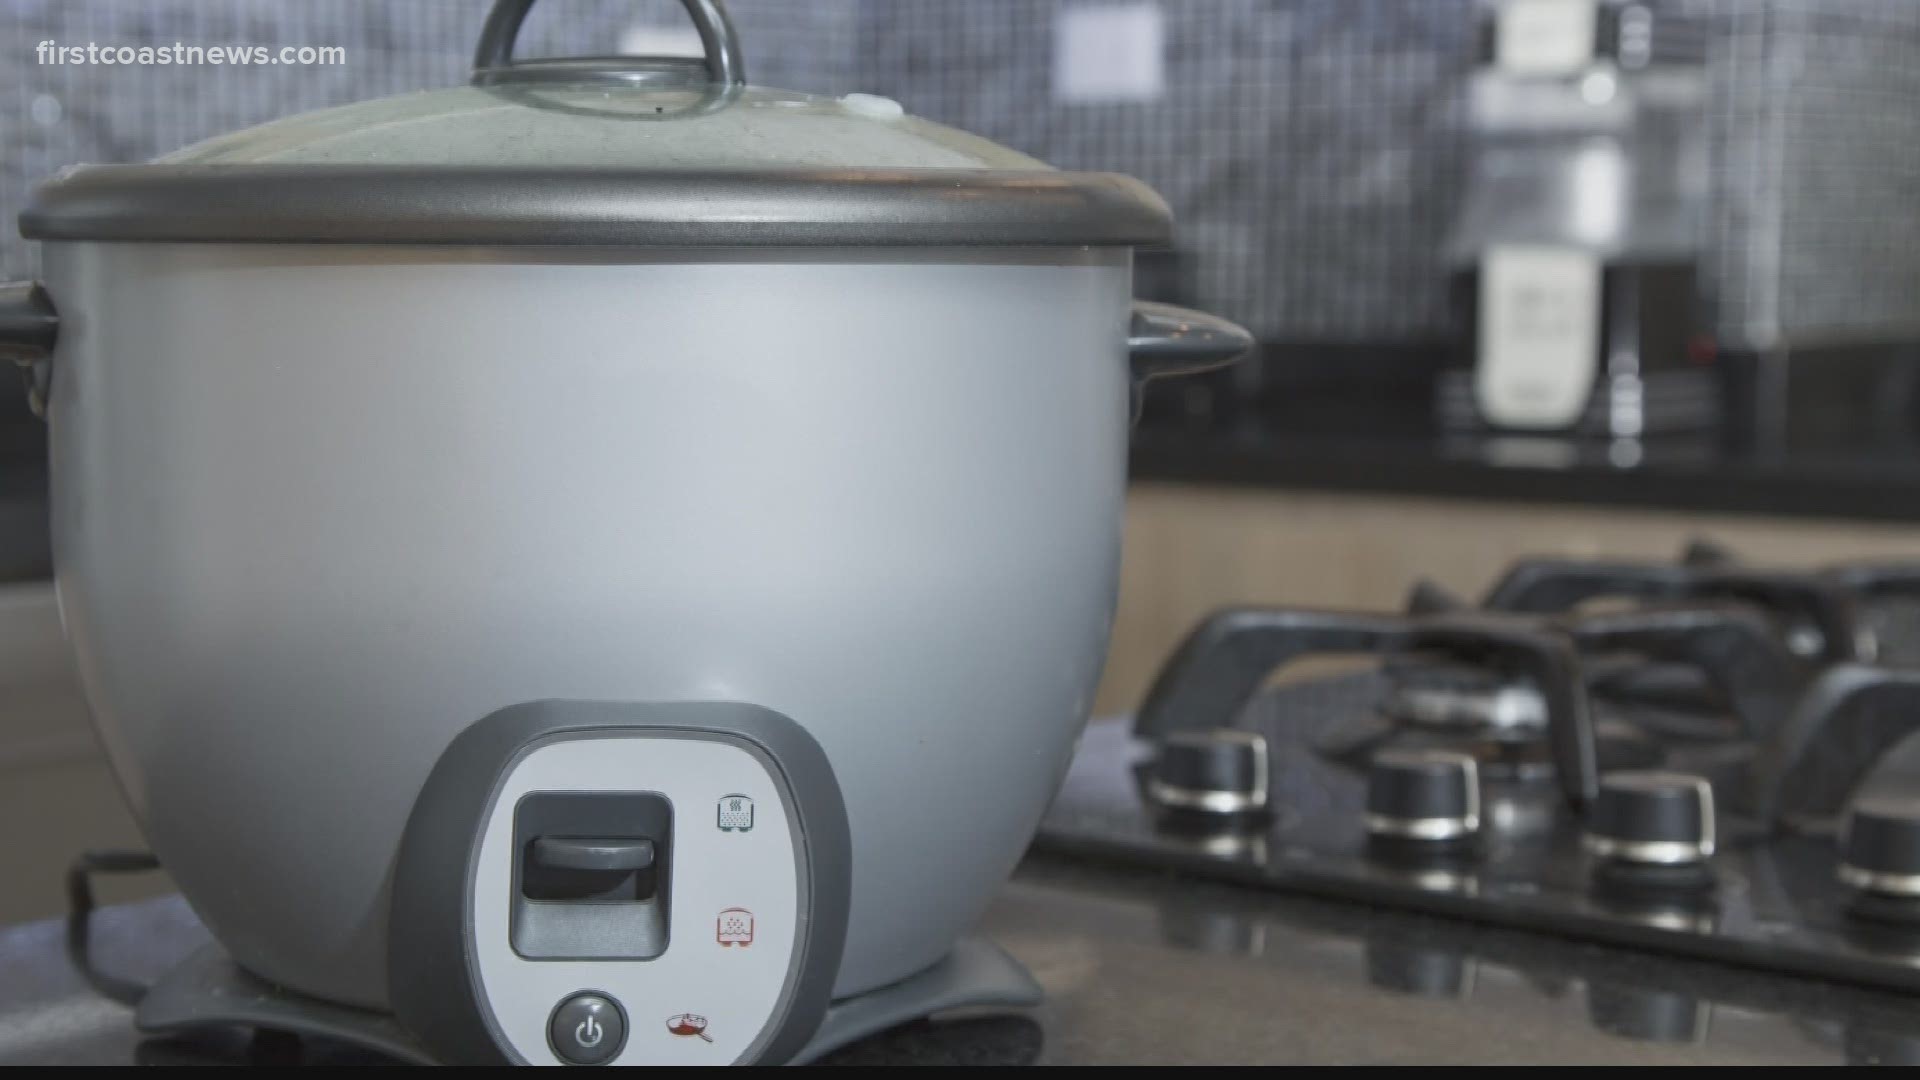 A new study finds electric cookers can decontaminate masks in less than one hour.